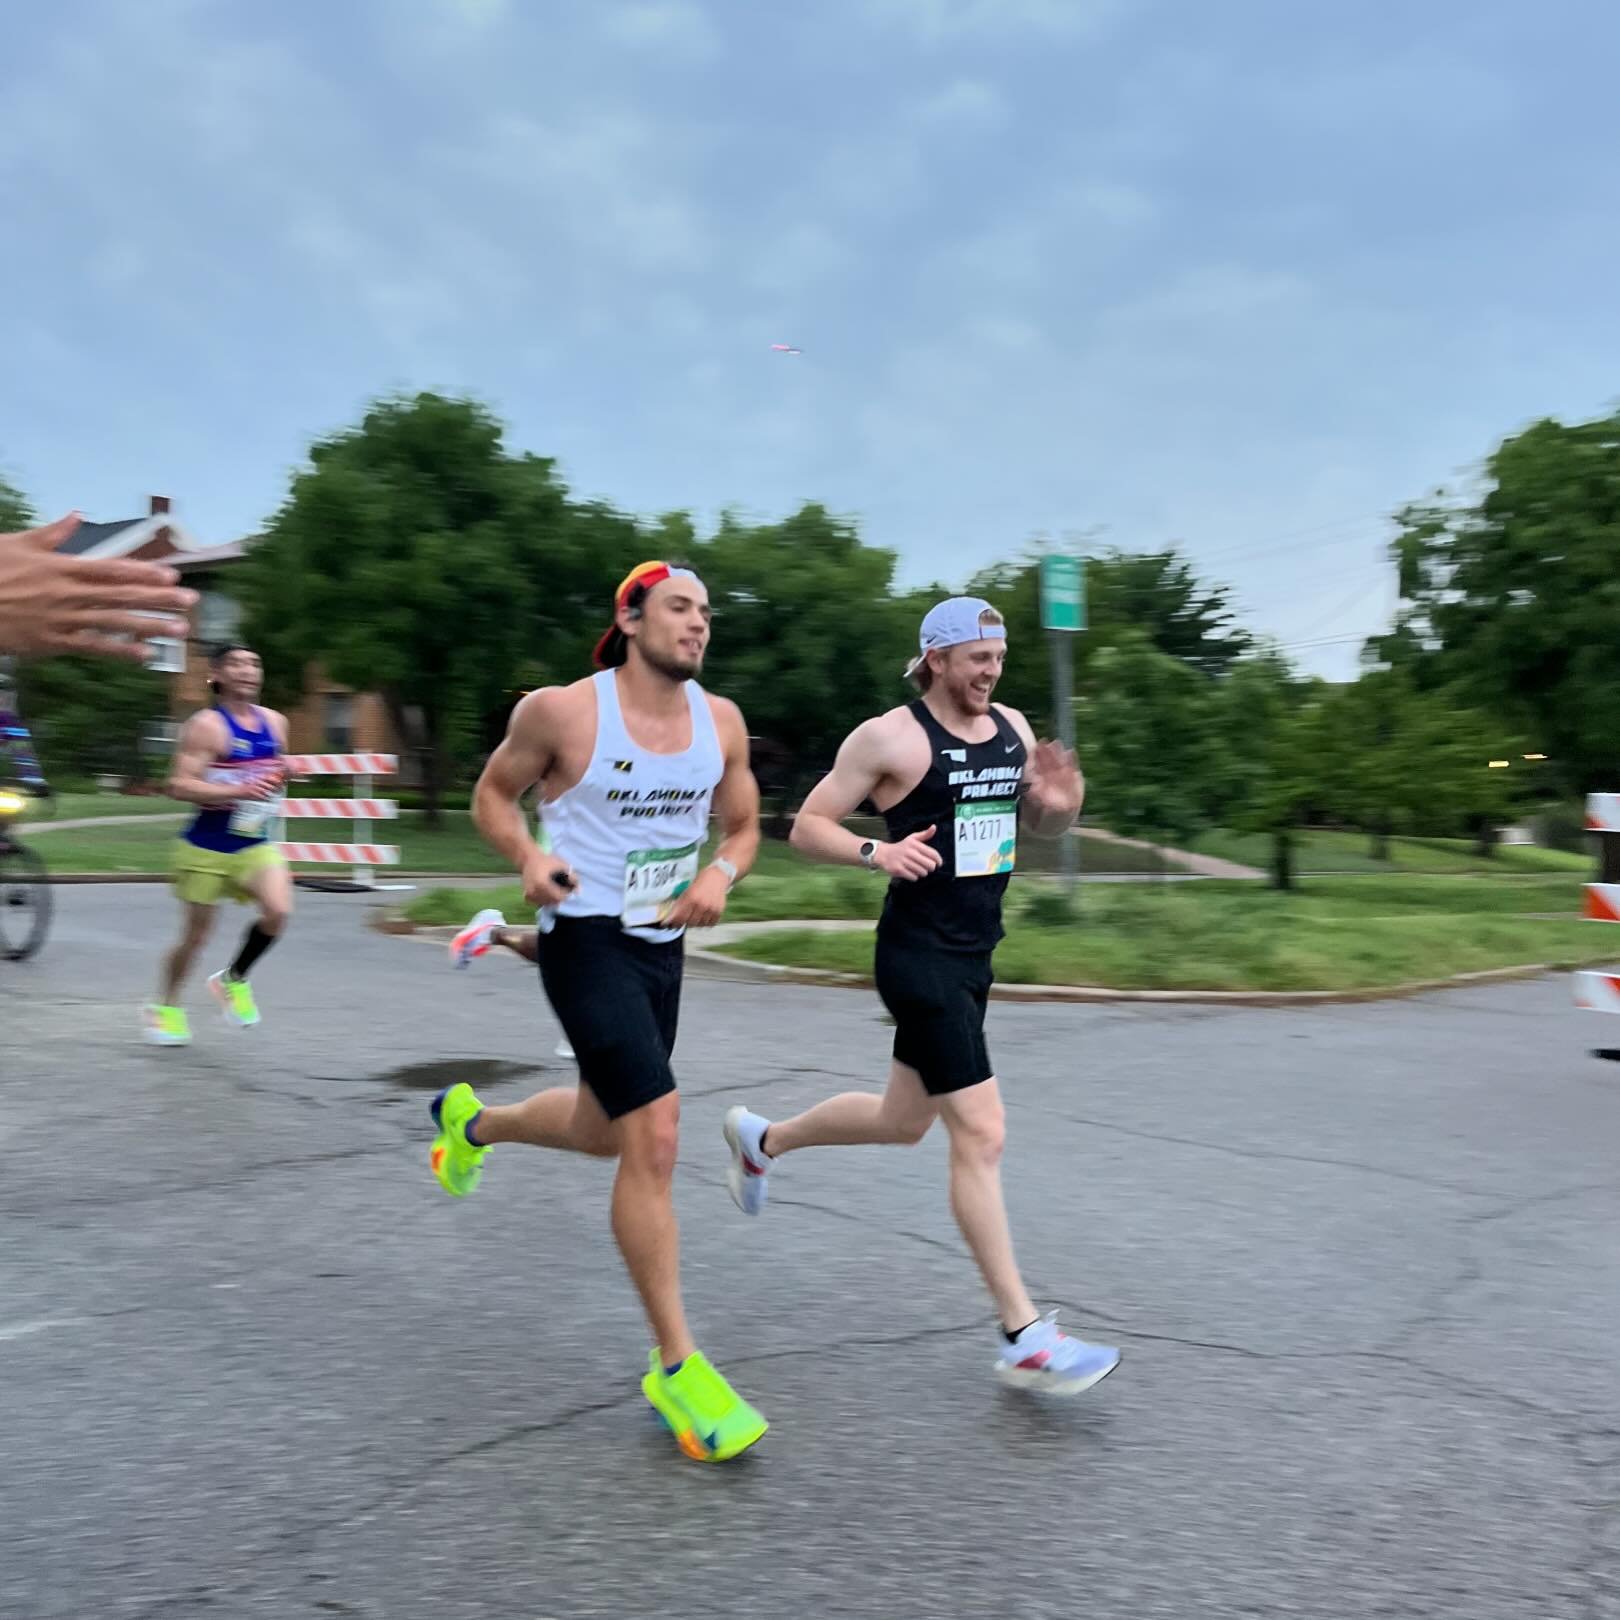 Let&rsquo;s talk about these men! ⚡️
Nate lowers his marathon PR! 3:07 ➡️ 3:03
Mack runs a stellar time of 3:15. Just shy of running a new PR. 
It&rsquo;s awesome seeing these men in their running journey! ⚡️
📸: @mrsnagoo